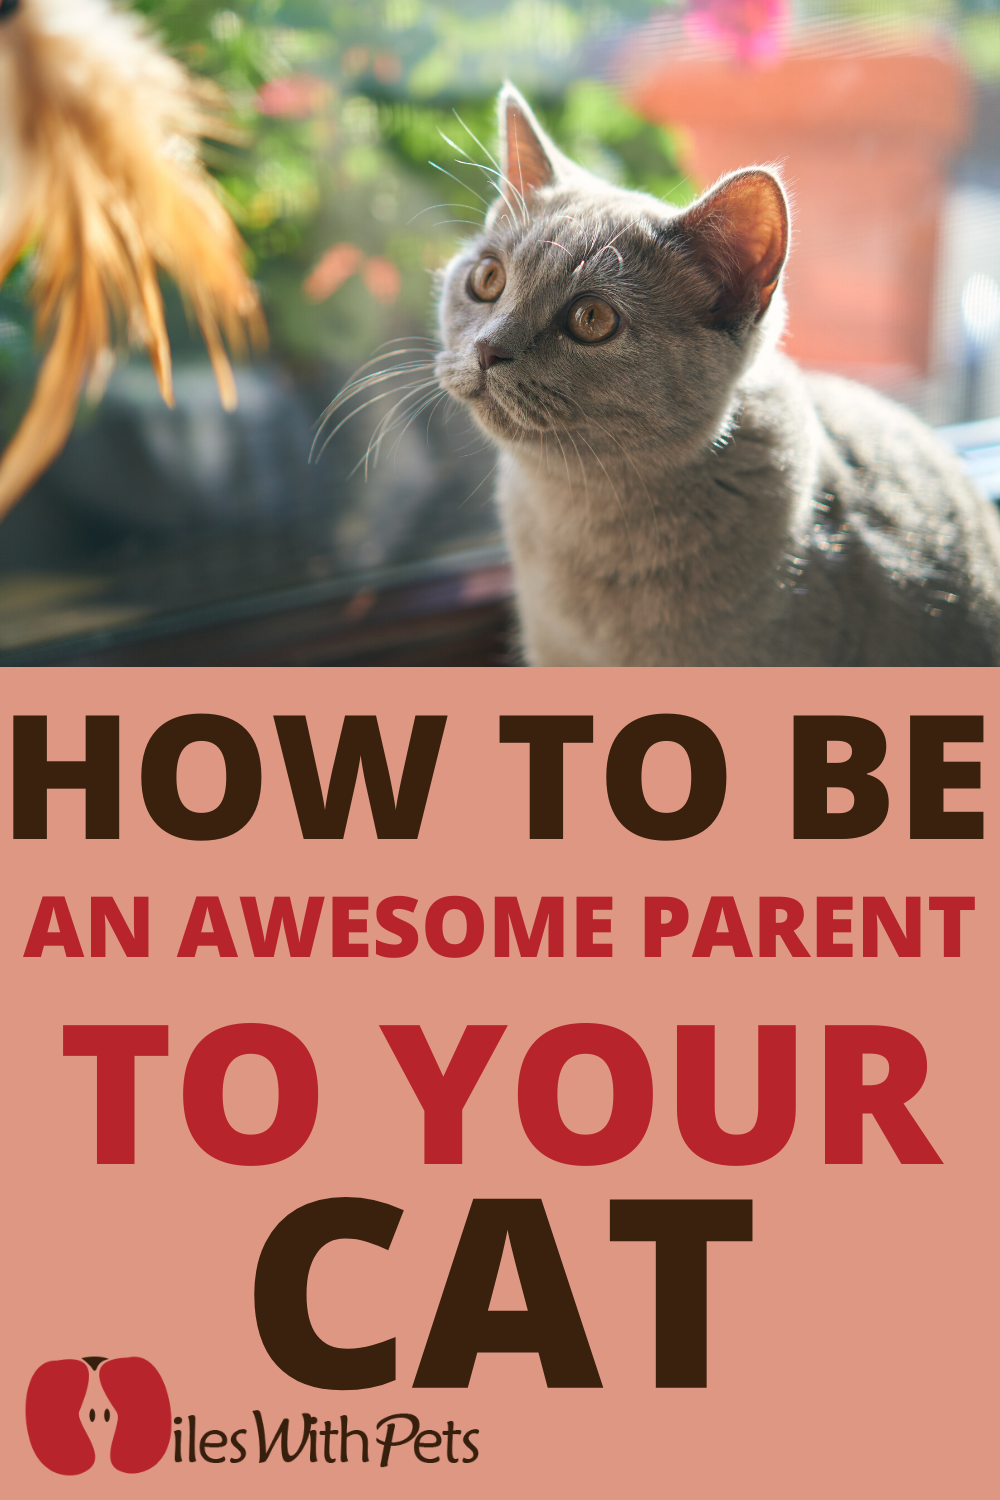 How to Be an Awesome Parent to your Cat